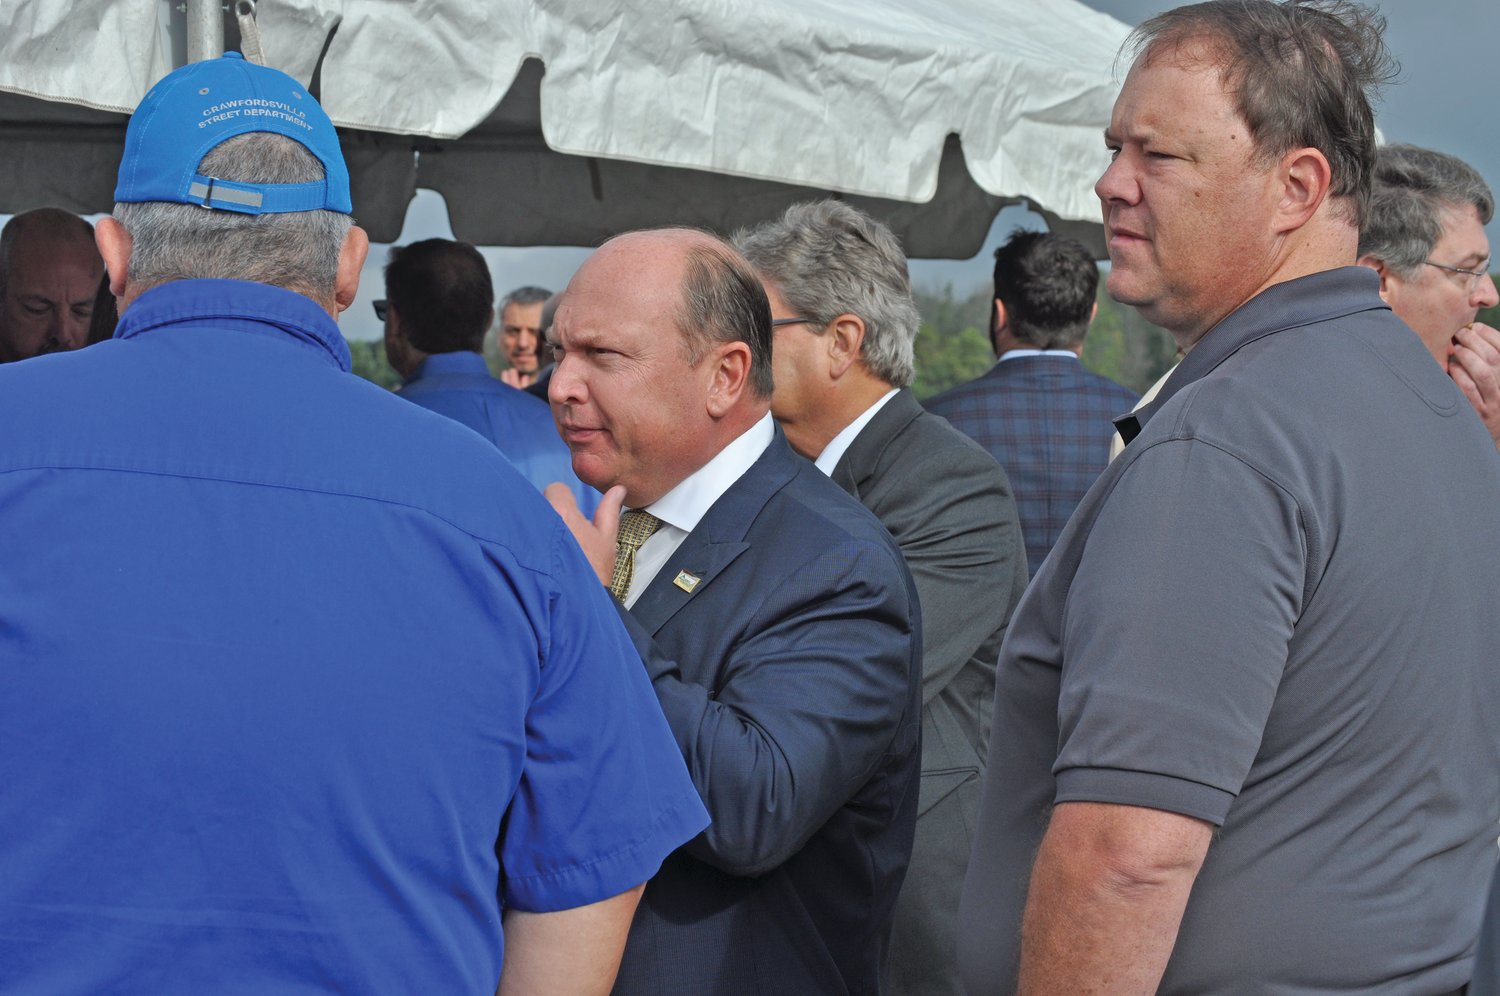 Steve McLaughlin, center, Crawfordsville Community School Corp. board president and Scott Bowling, superintendent of Crawfordsville schools, speak with Scott Hesler, Crawfordsville Street Department superintendent, at a groundbreaking ceremony for the Tempur Sealy plant on Thursday.